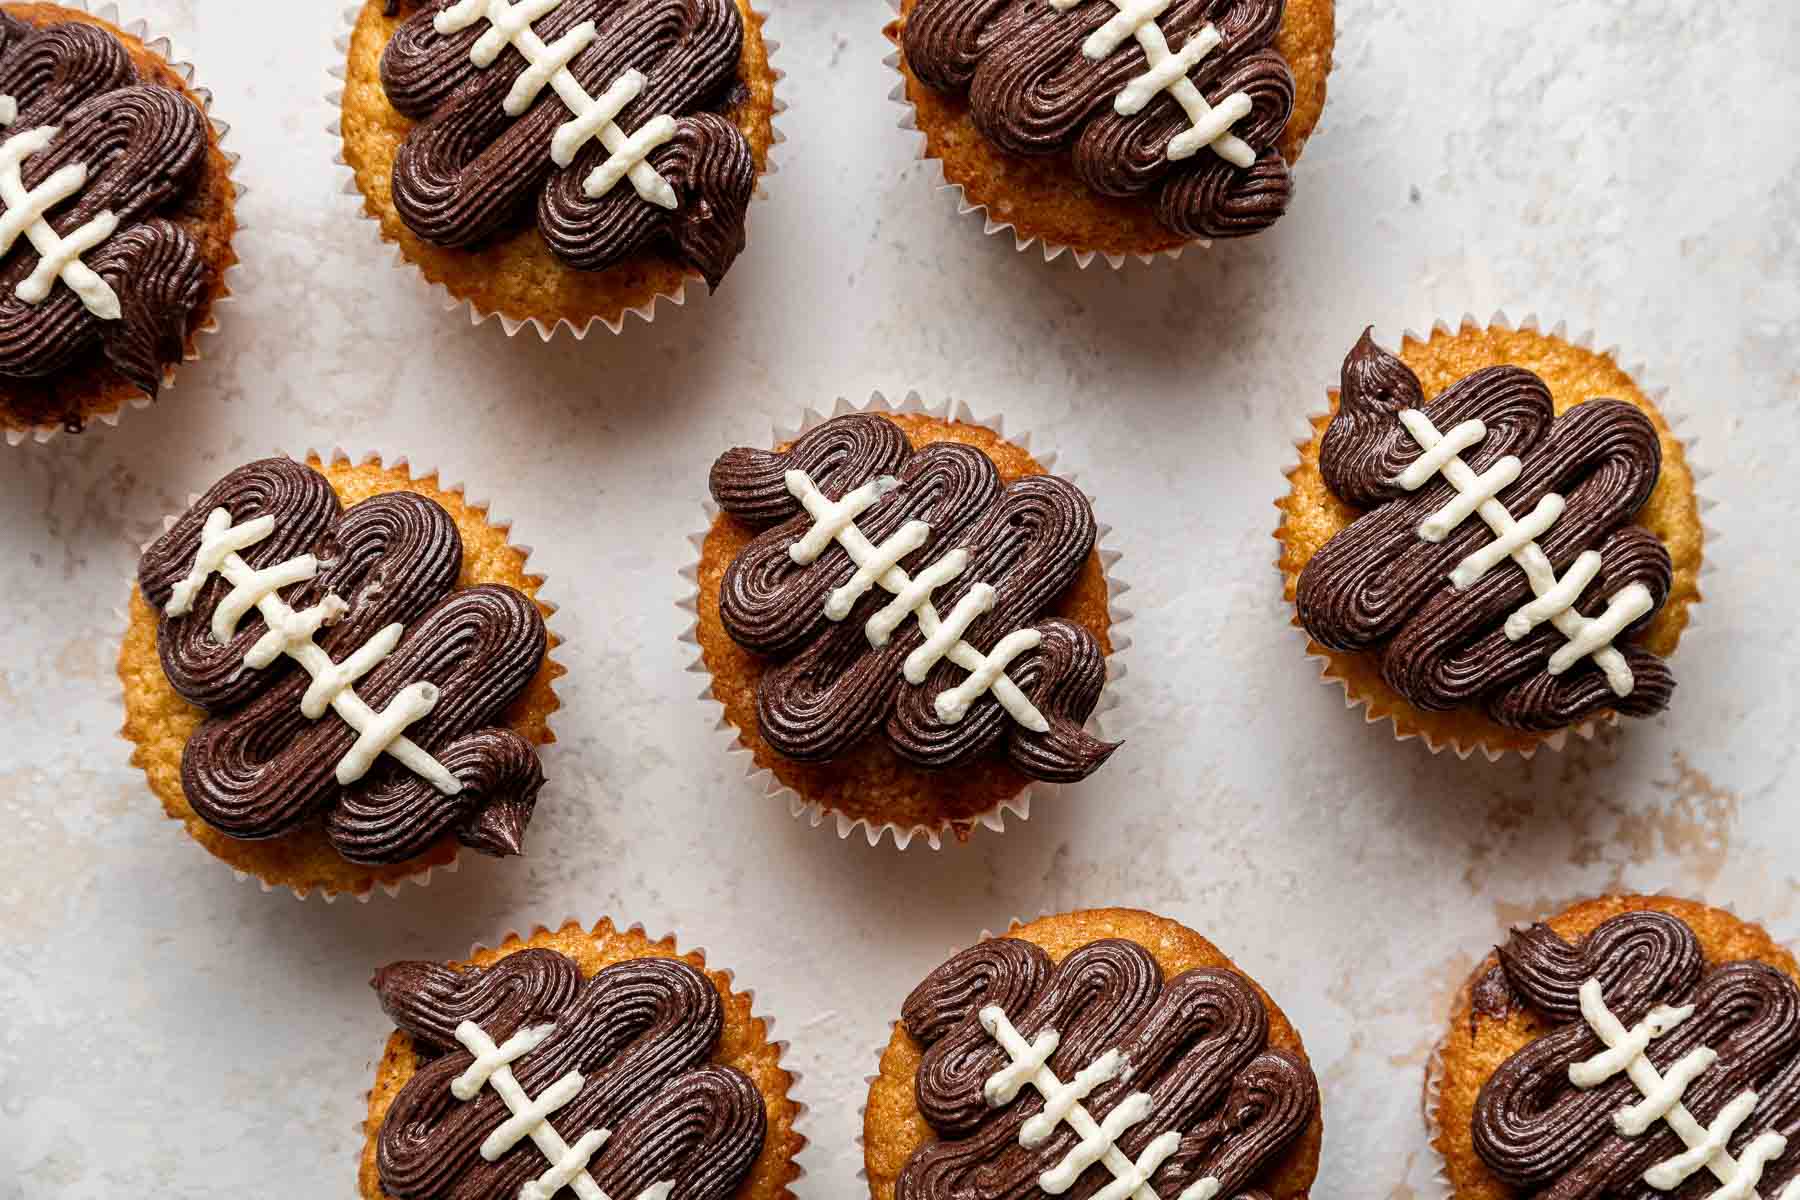 Cupcakes with footballs piped on top.